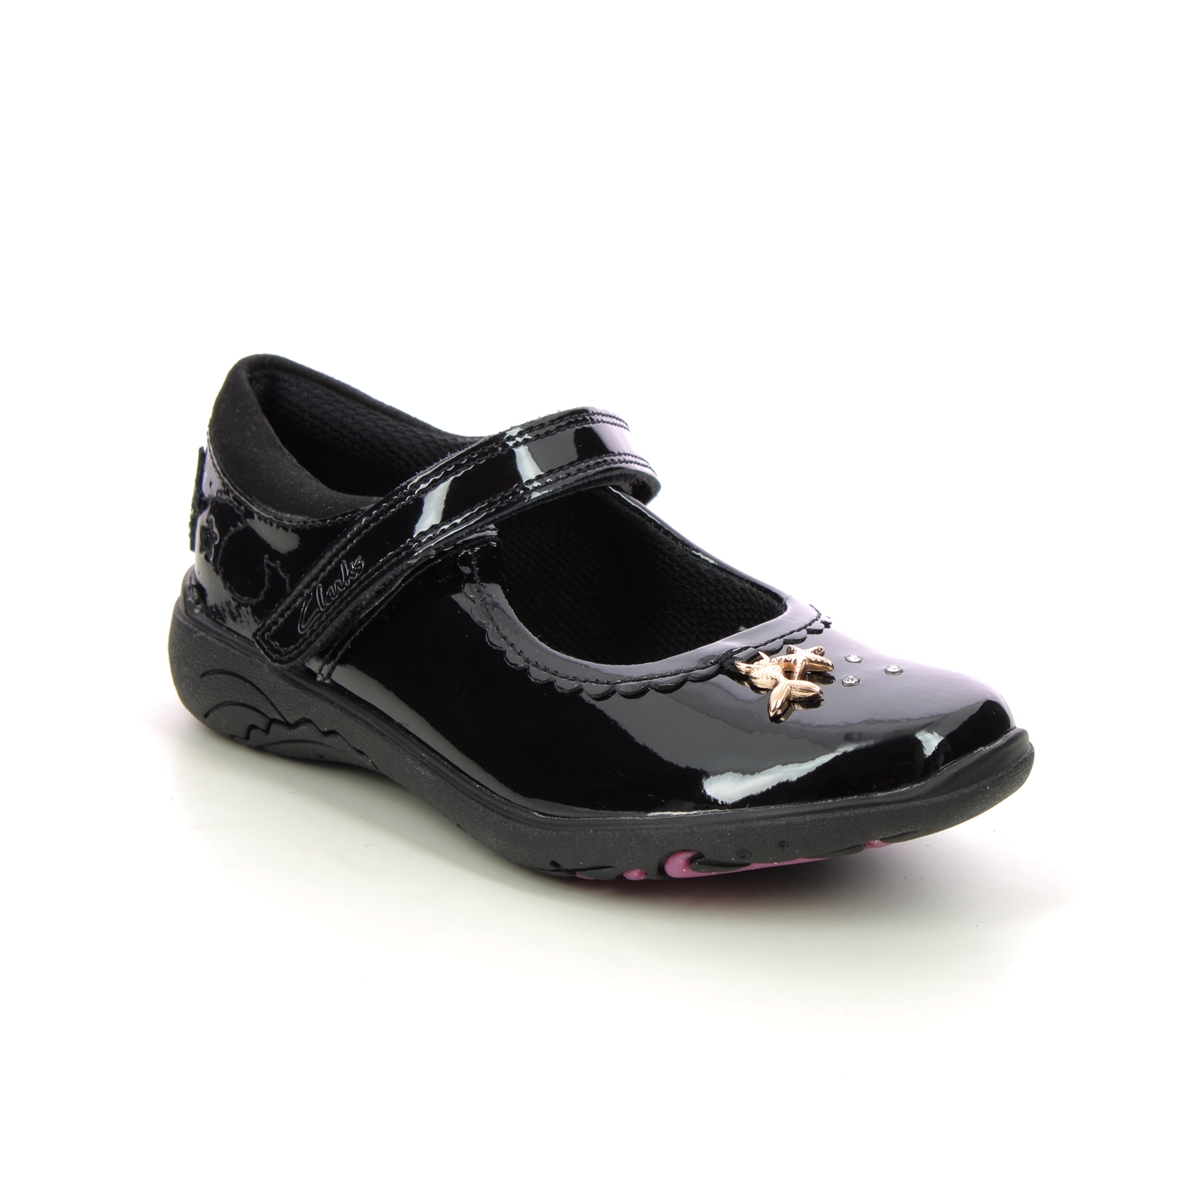 Clarks Relda Sea K Mary Jane Black patent Kids girls school shoes 7224-17G in a Plain Leather in Size 8.5